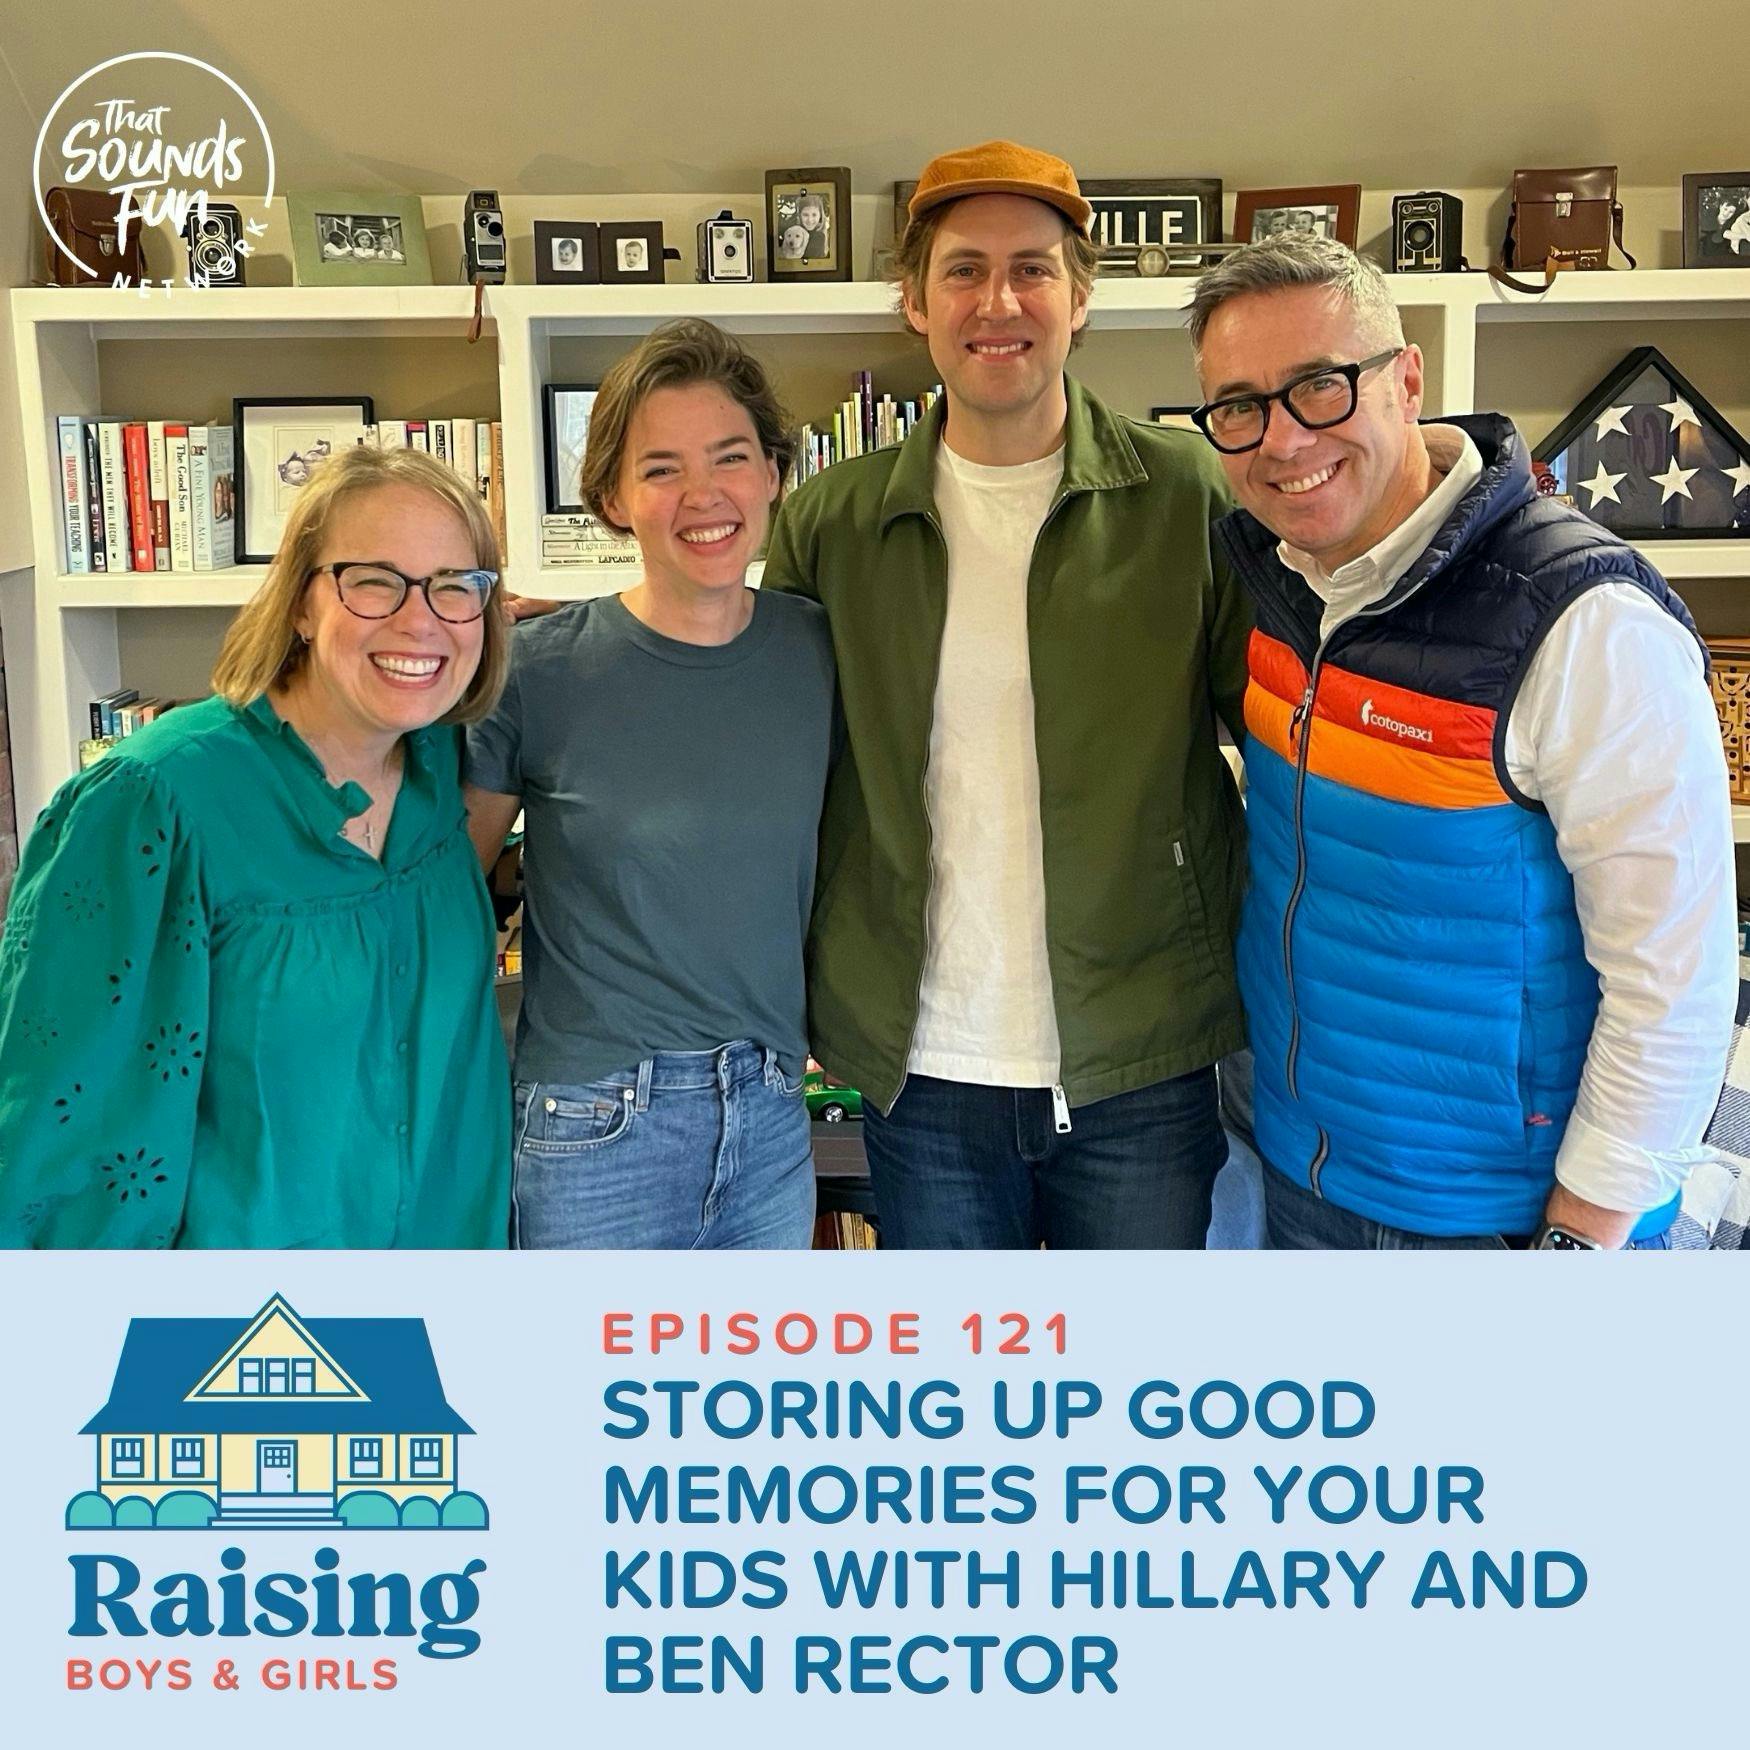 Episode 121: Storing Up Good Memories for Your Kids with Hillary and Ben Rector